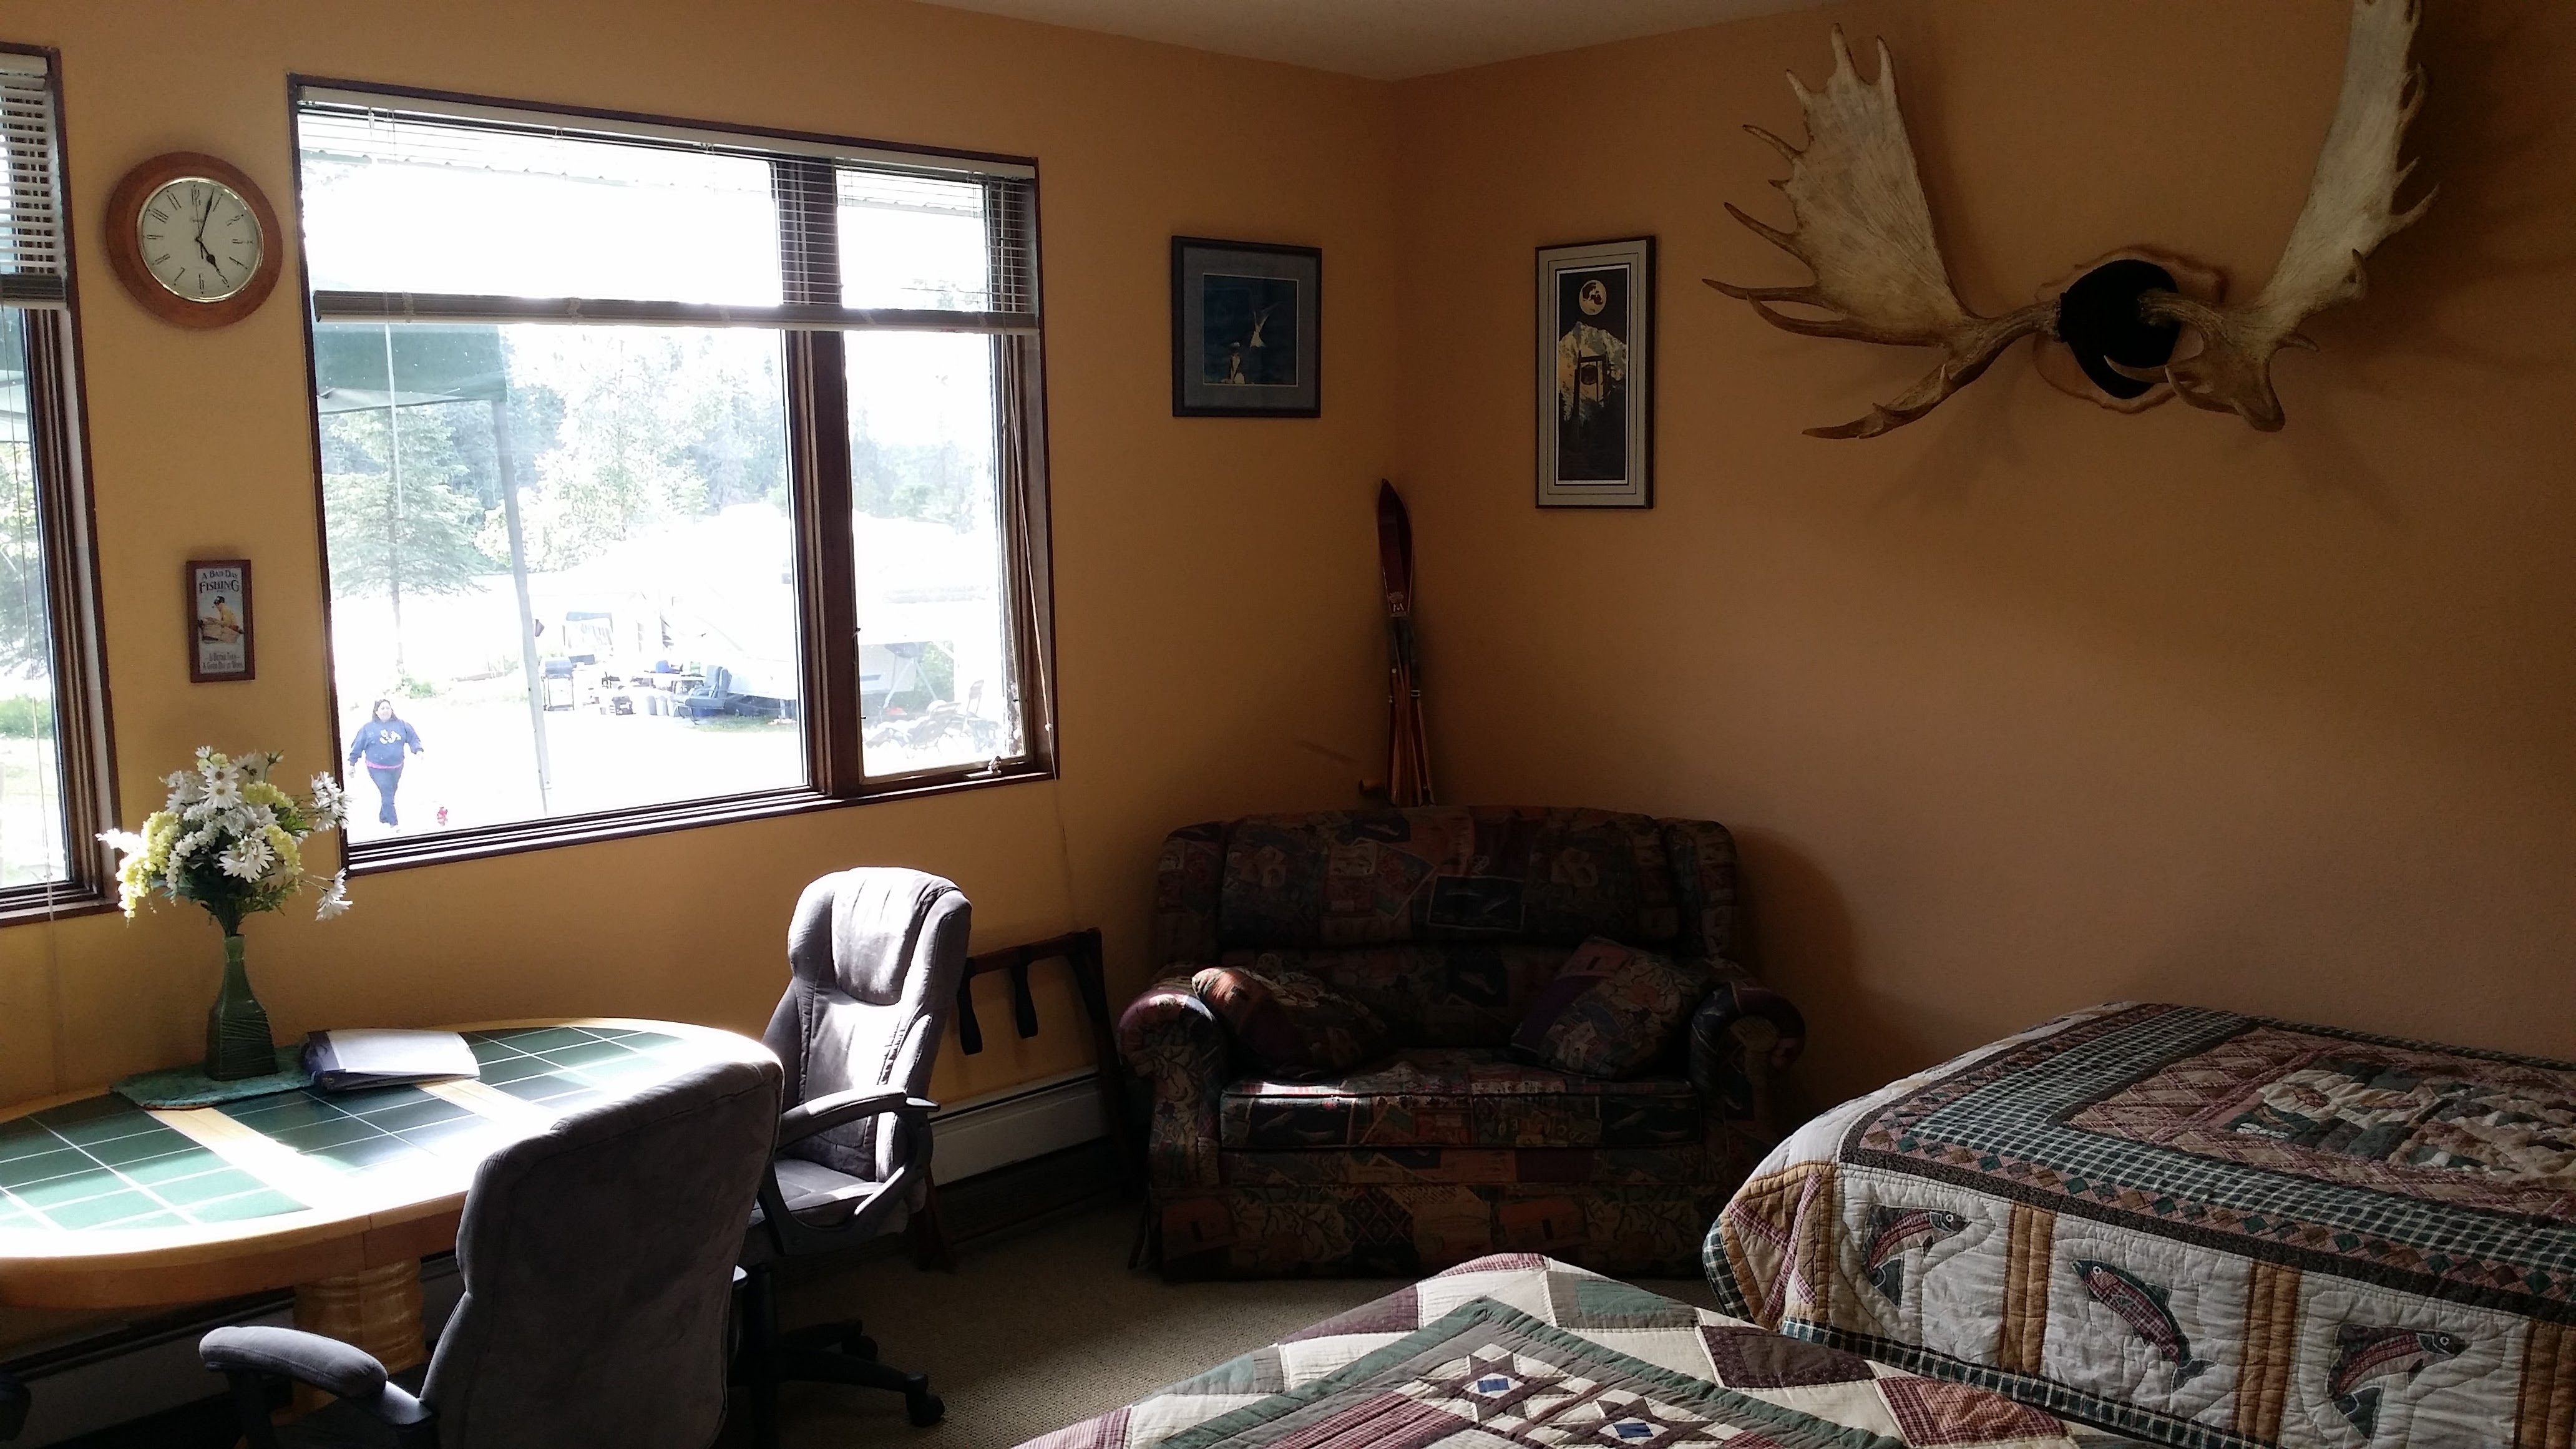 kenai river bed and breakfast suite